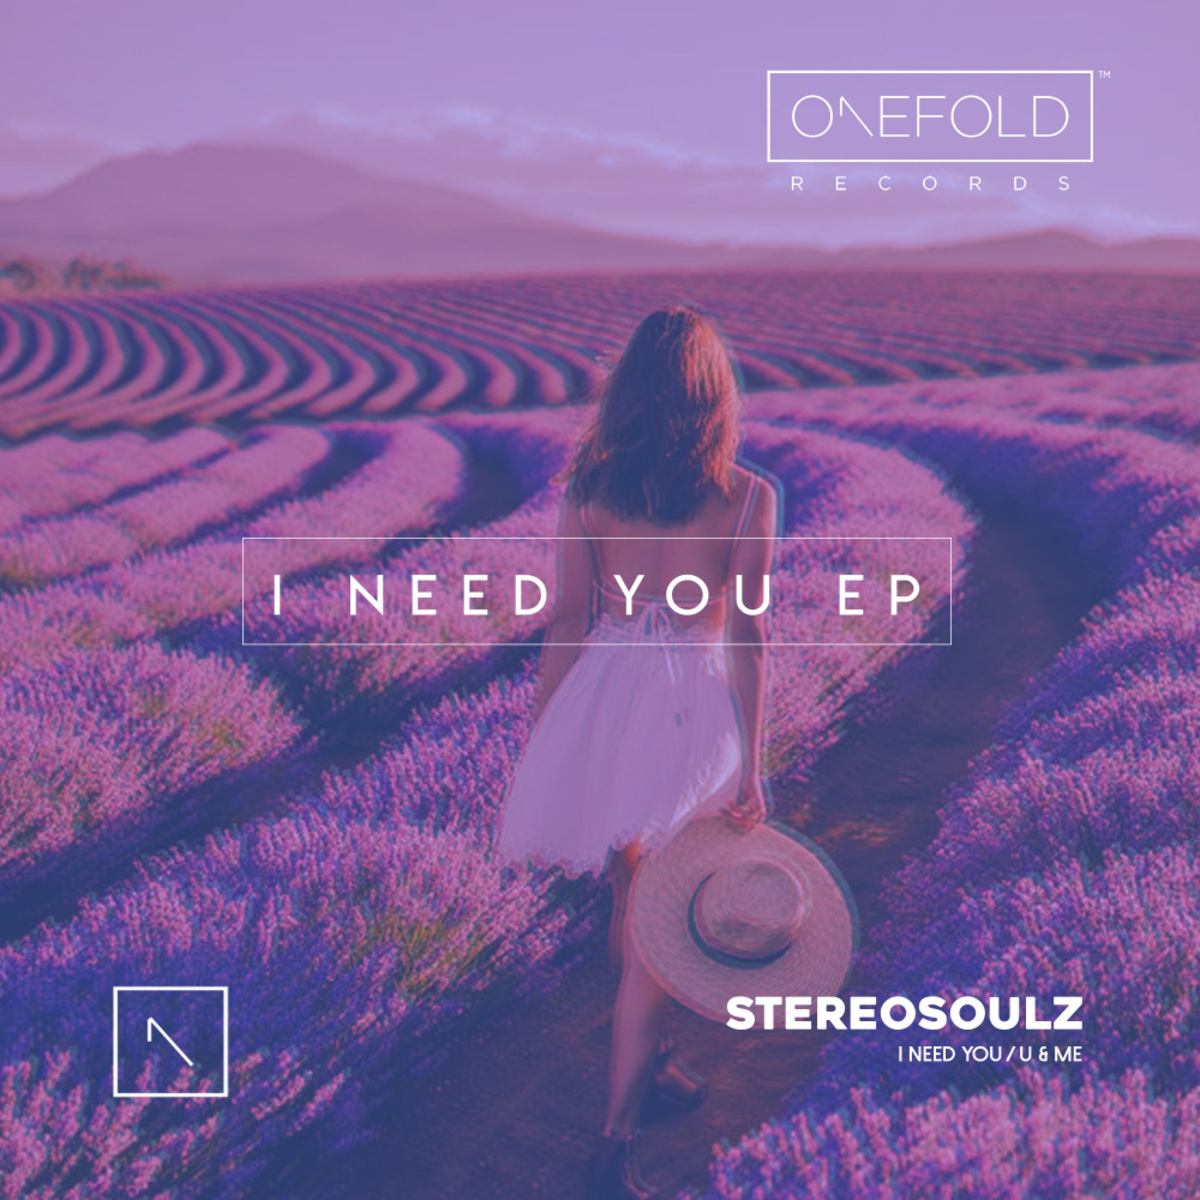 Stereosoulz - I Need You EP / OneFold Records